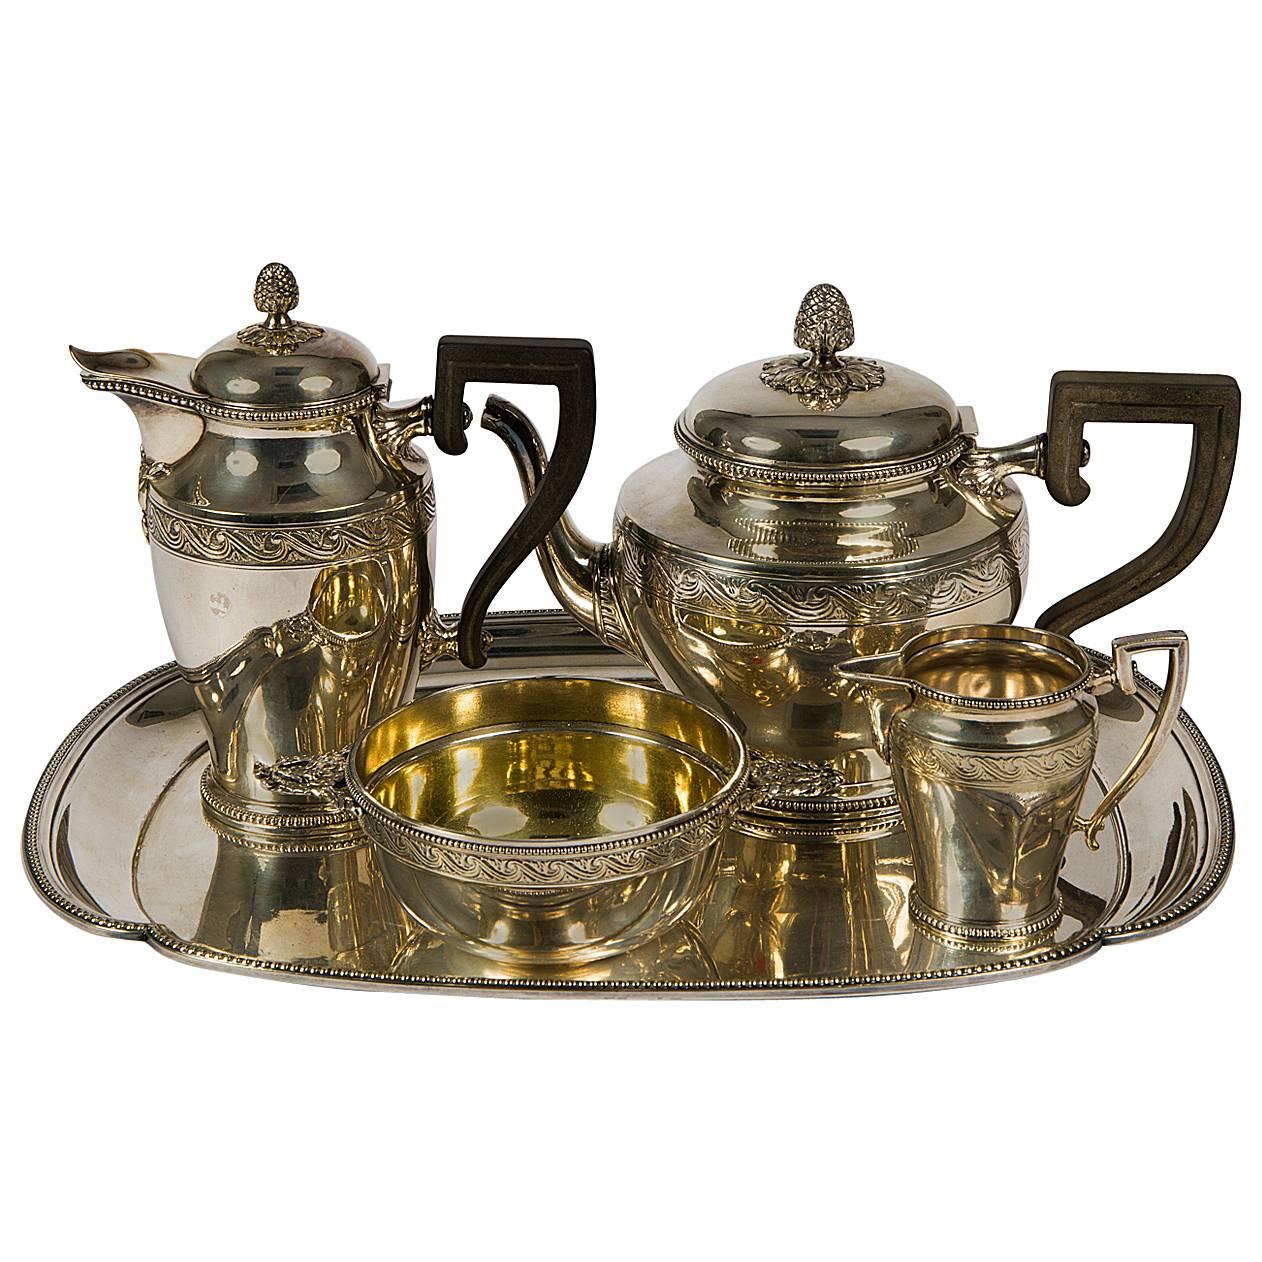 Marvelous Christofle Tea and Coffee Set with Ebony Handles For Sale